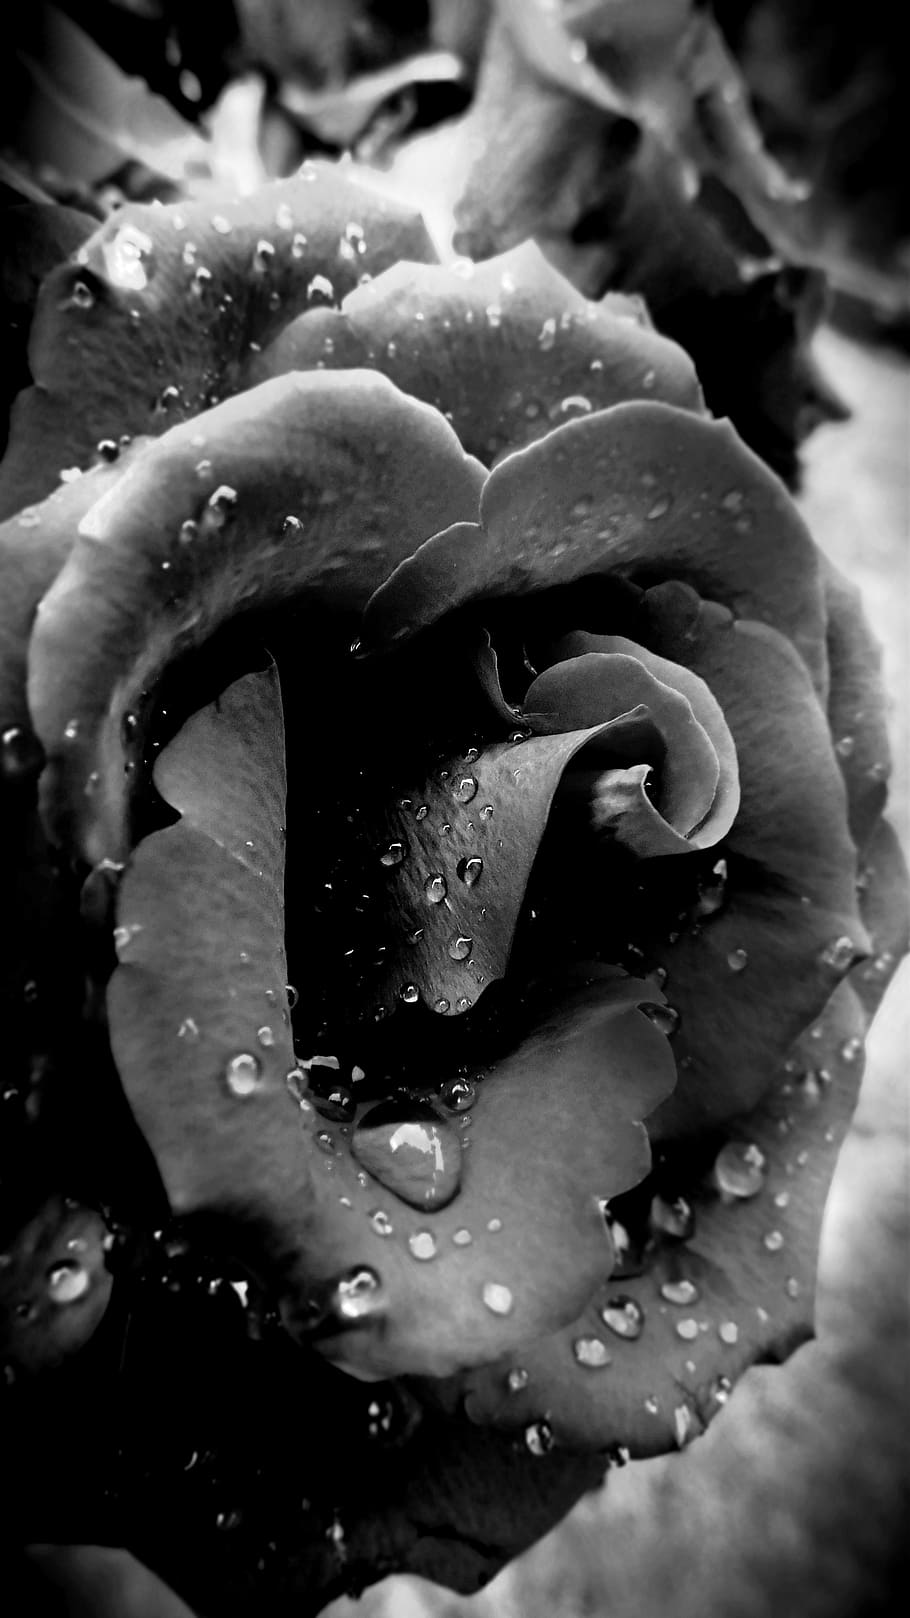 Roses Black and White Wallpaper - Happywall